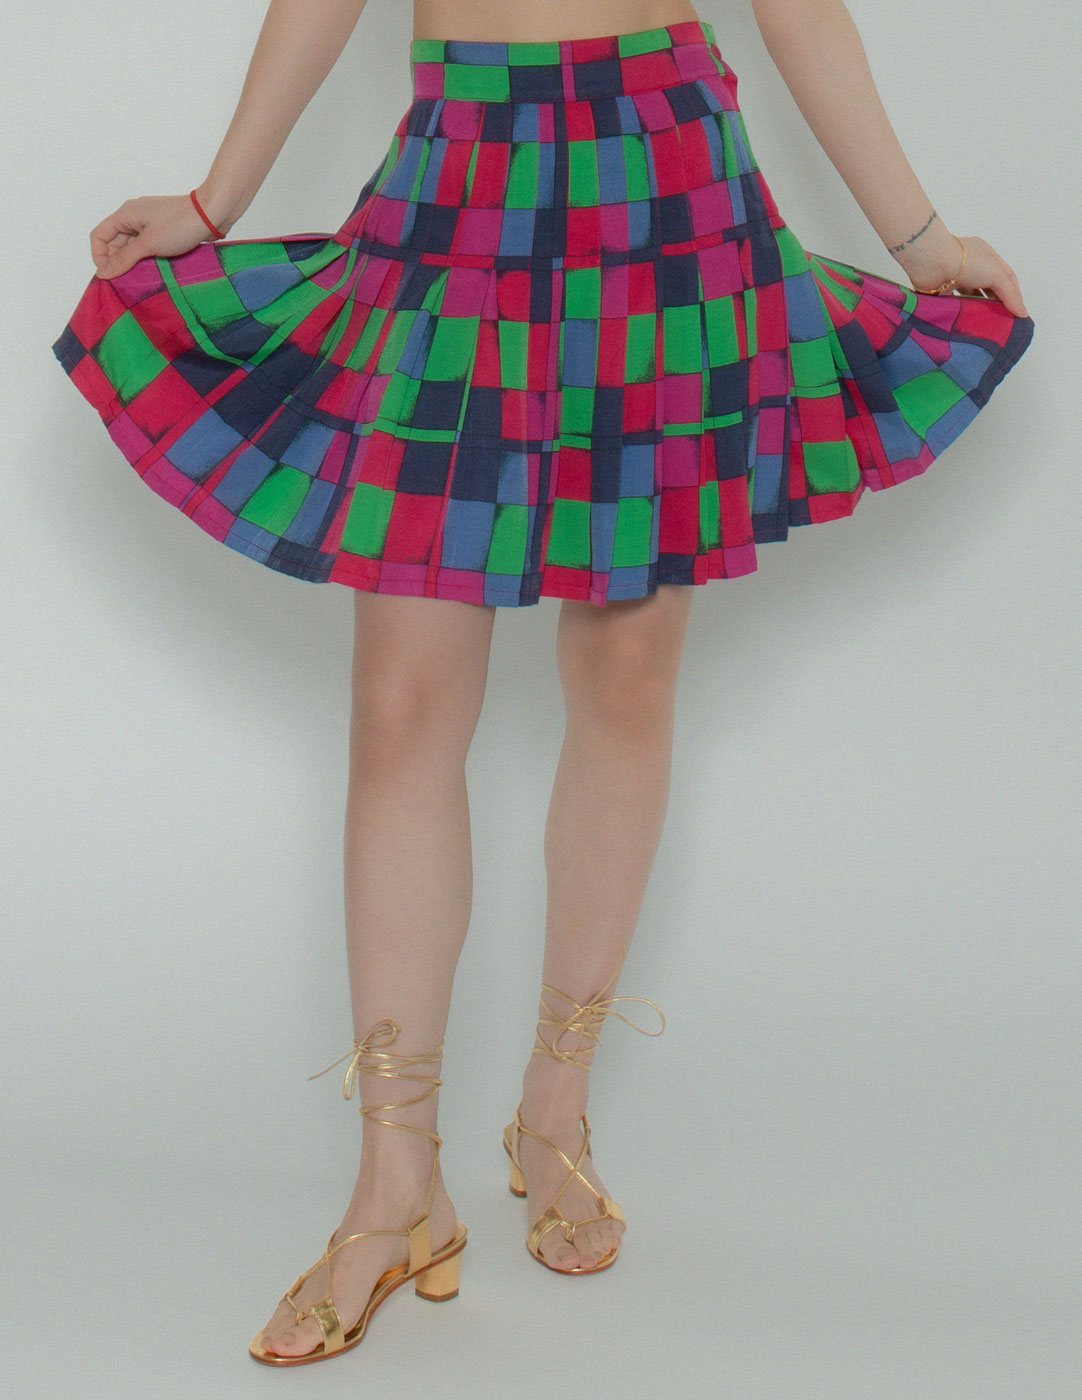 Versus vintage multi-colored pleated skirt front detail